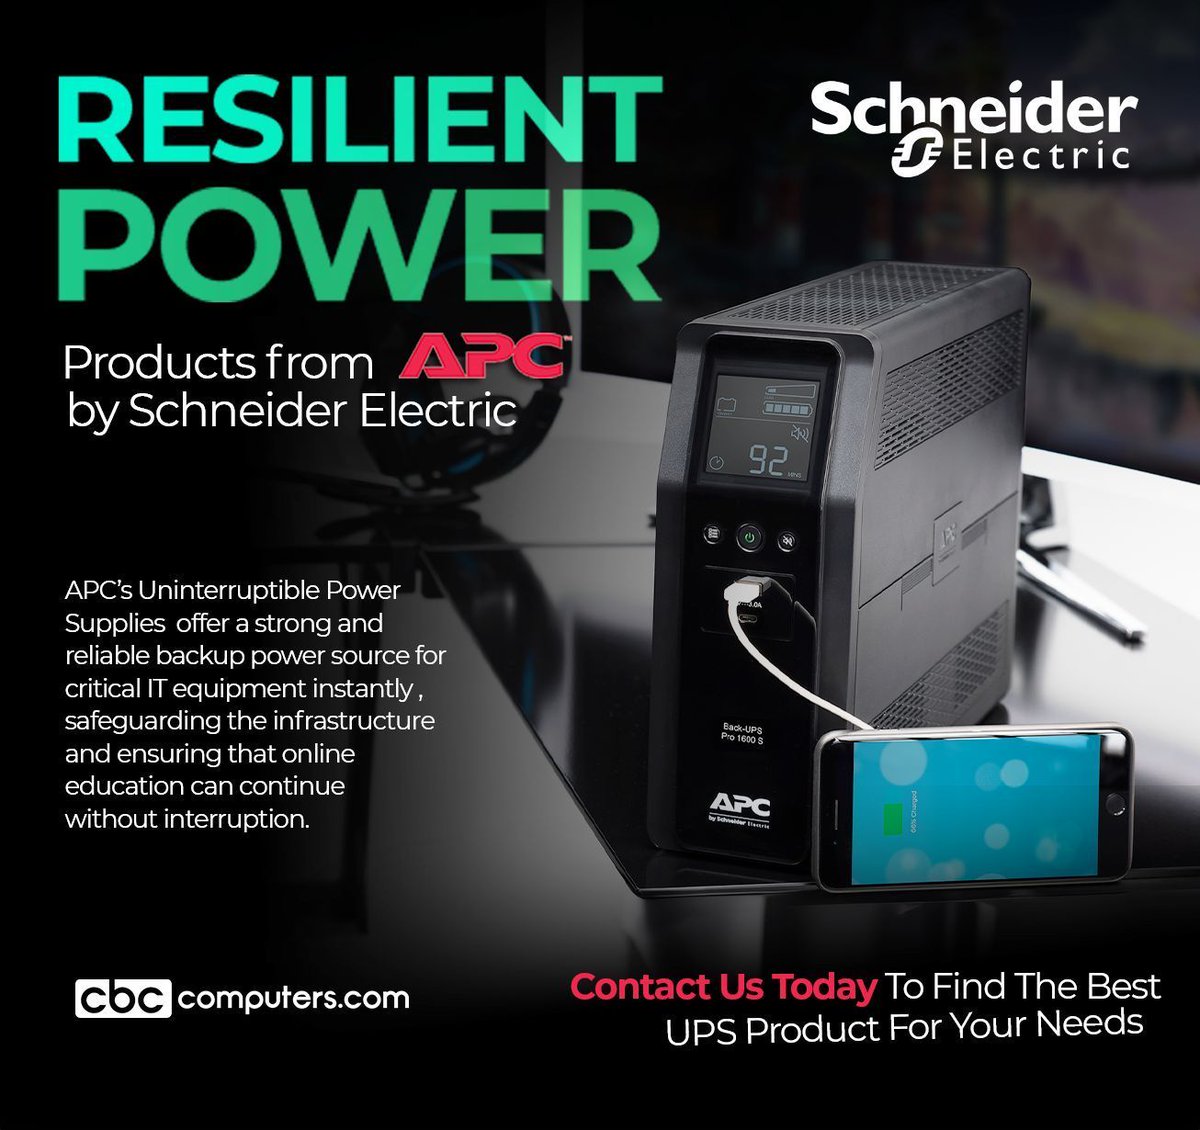 Never miss a beat in education! Discover the security and continuity APC by Schneider Electric UPS solutions brings to schools. Empower your learning environment.

#APC #APCUPS #UPS #EdTech #EducationalTechnology #PoweringLearning #UninterruptedLearning #TechForSchools #APCPower